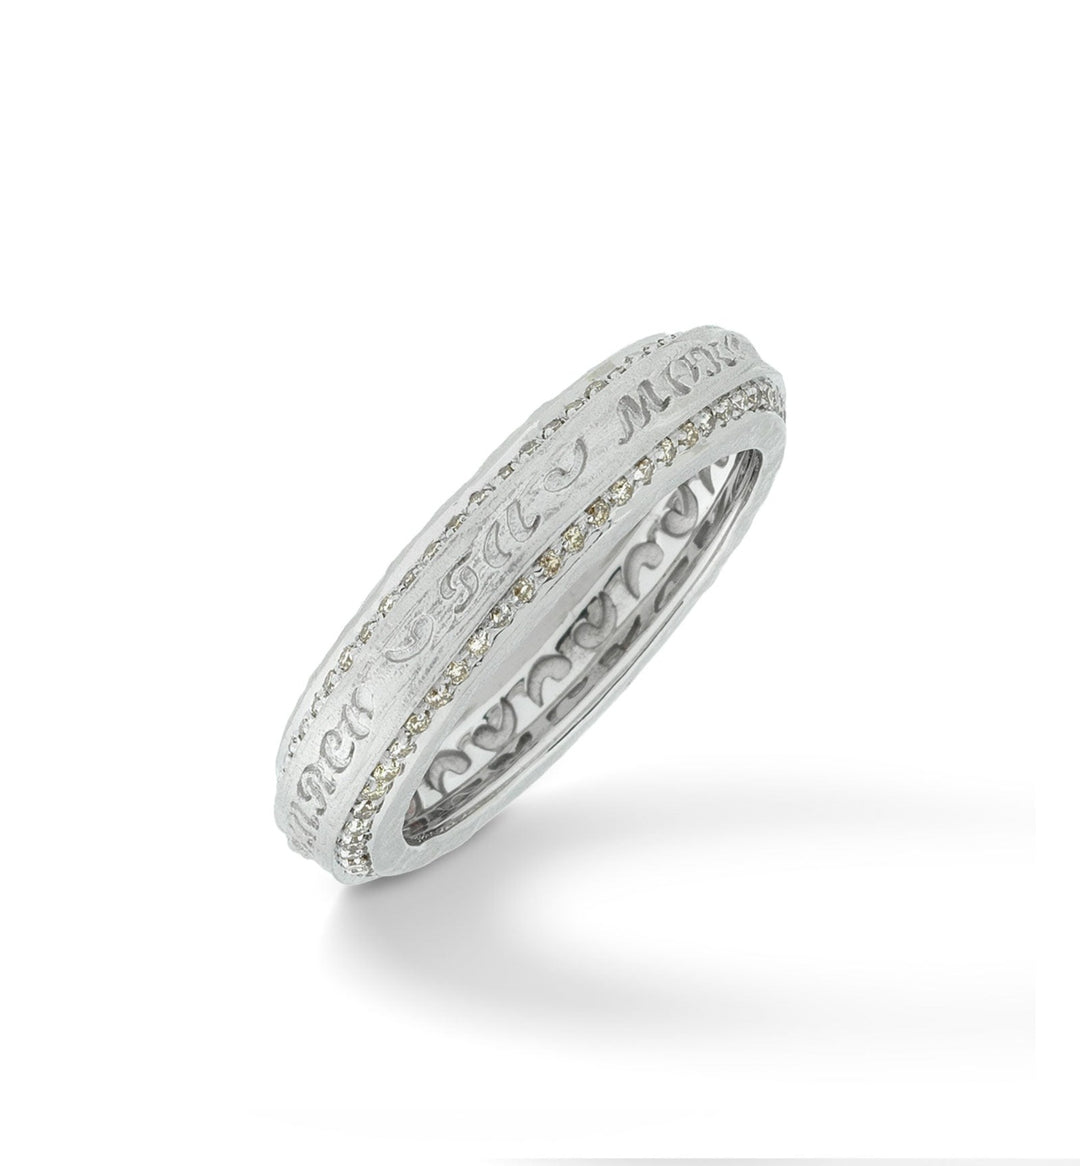 The Other Half Narrow Ring with Double Line Champagne Diamonds and 18kt White Gold